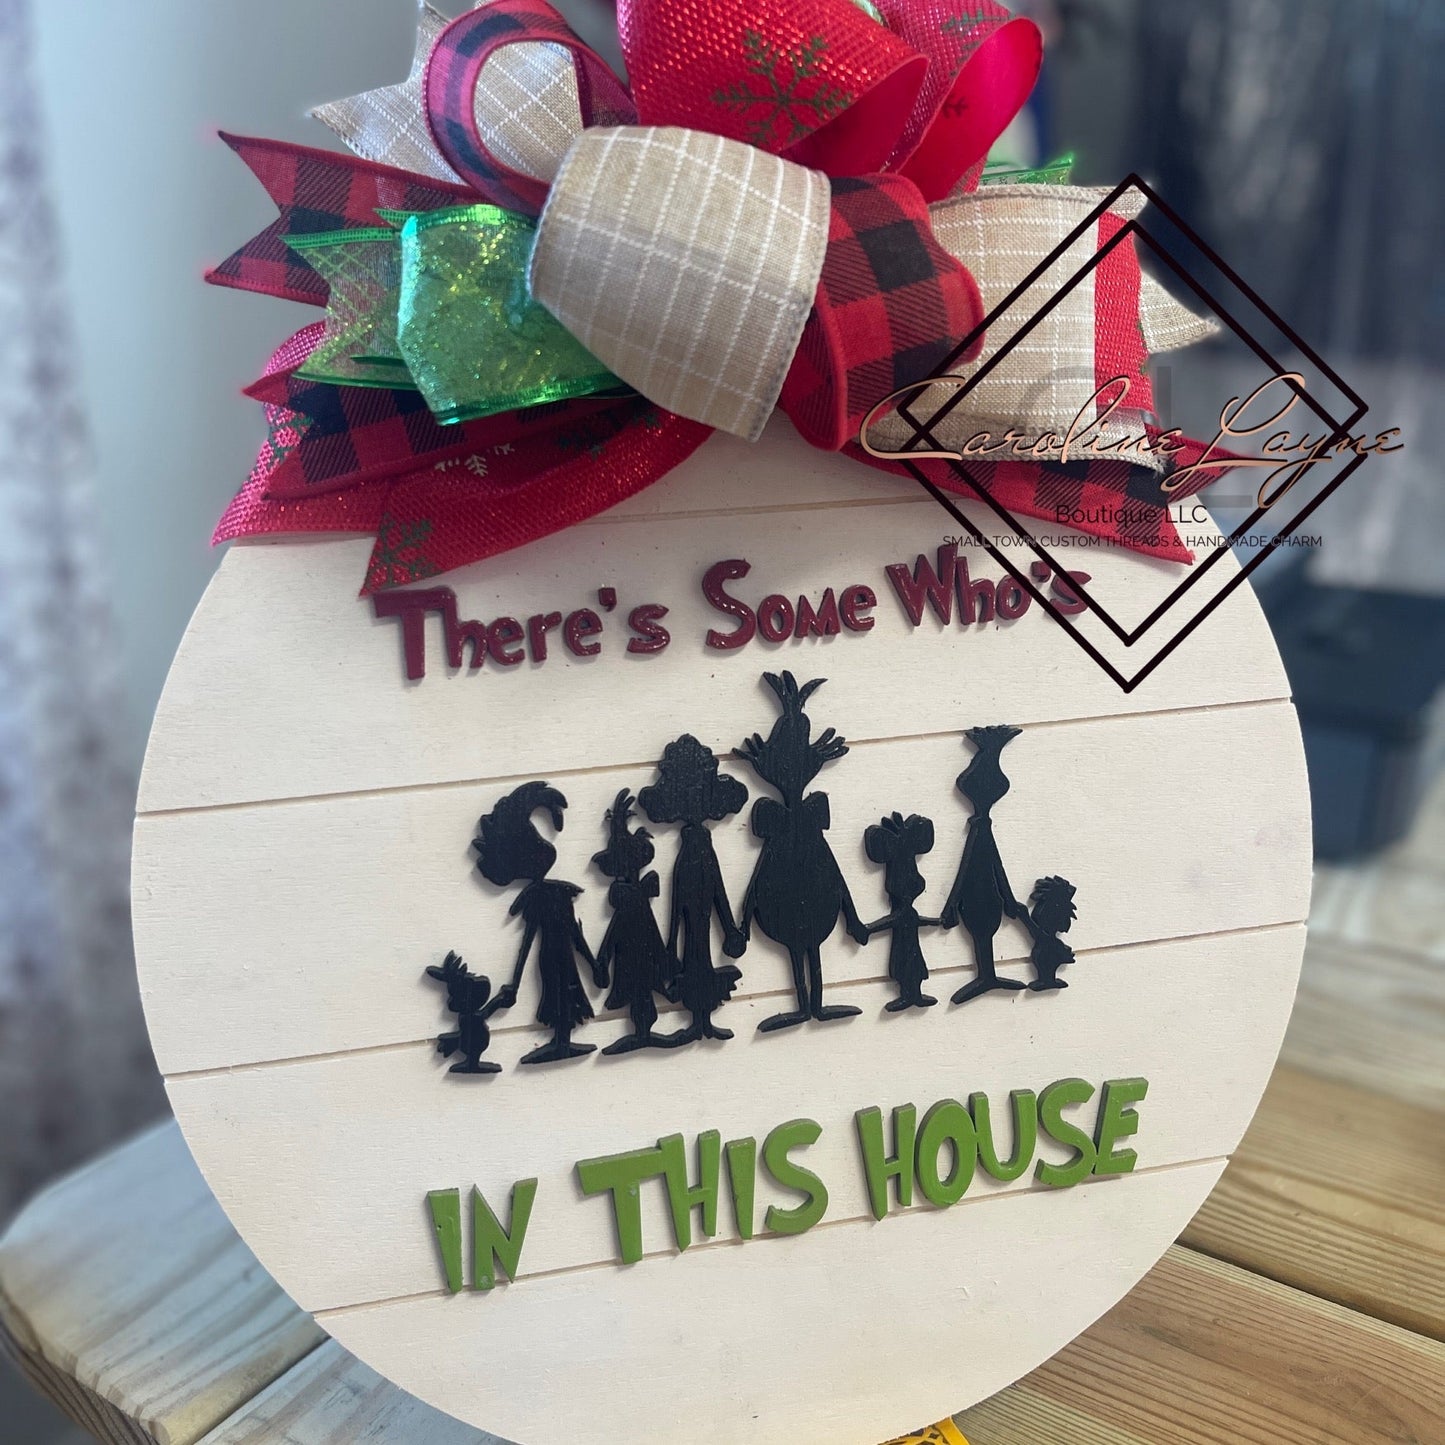 There’s some who’s in this house Door Hanger - Caroline Layne Boutique LLC